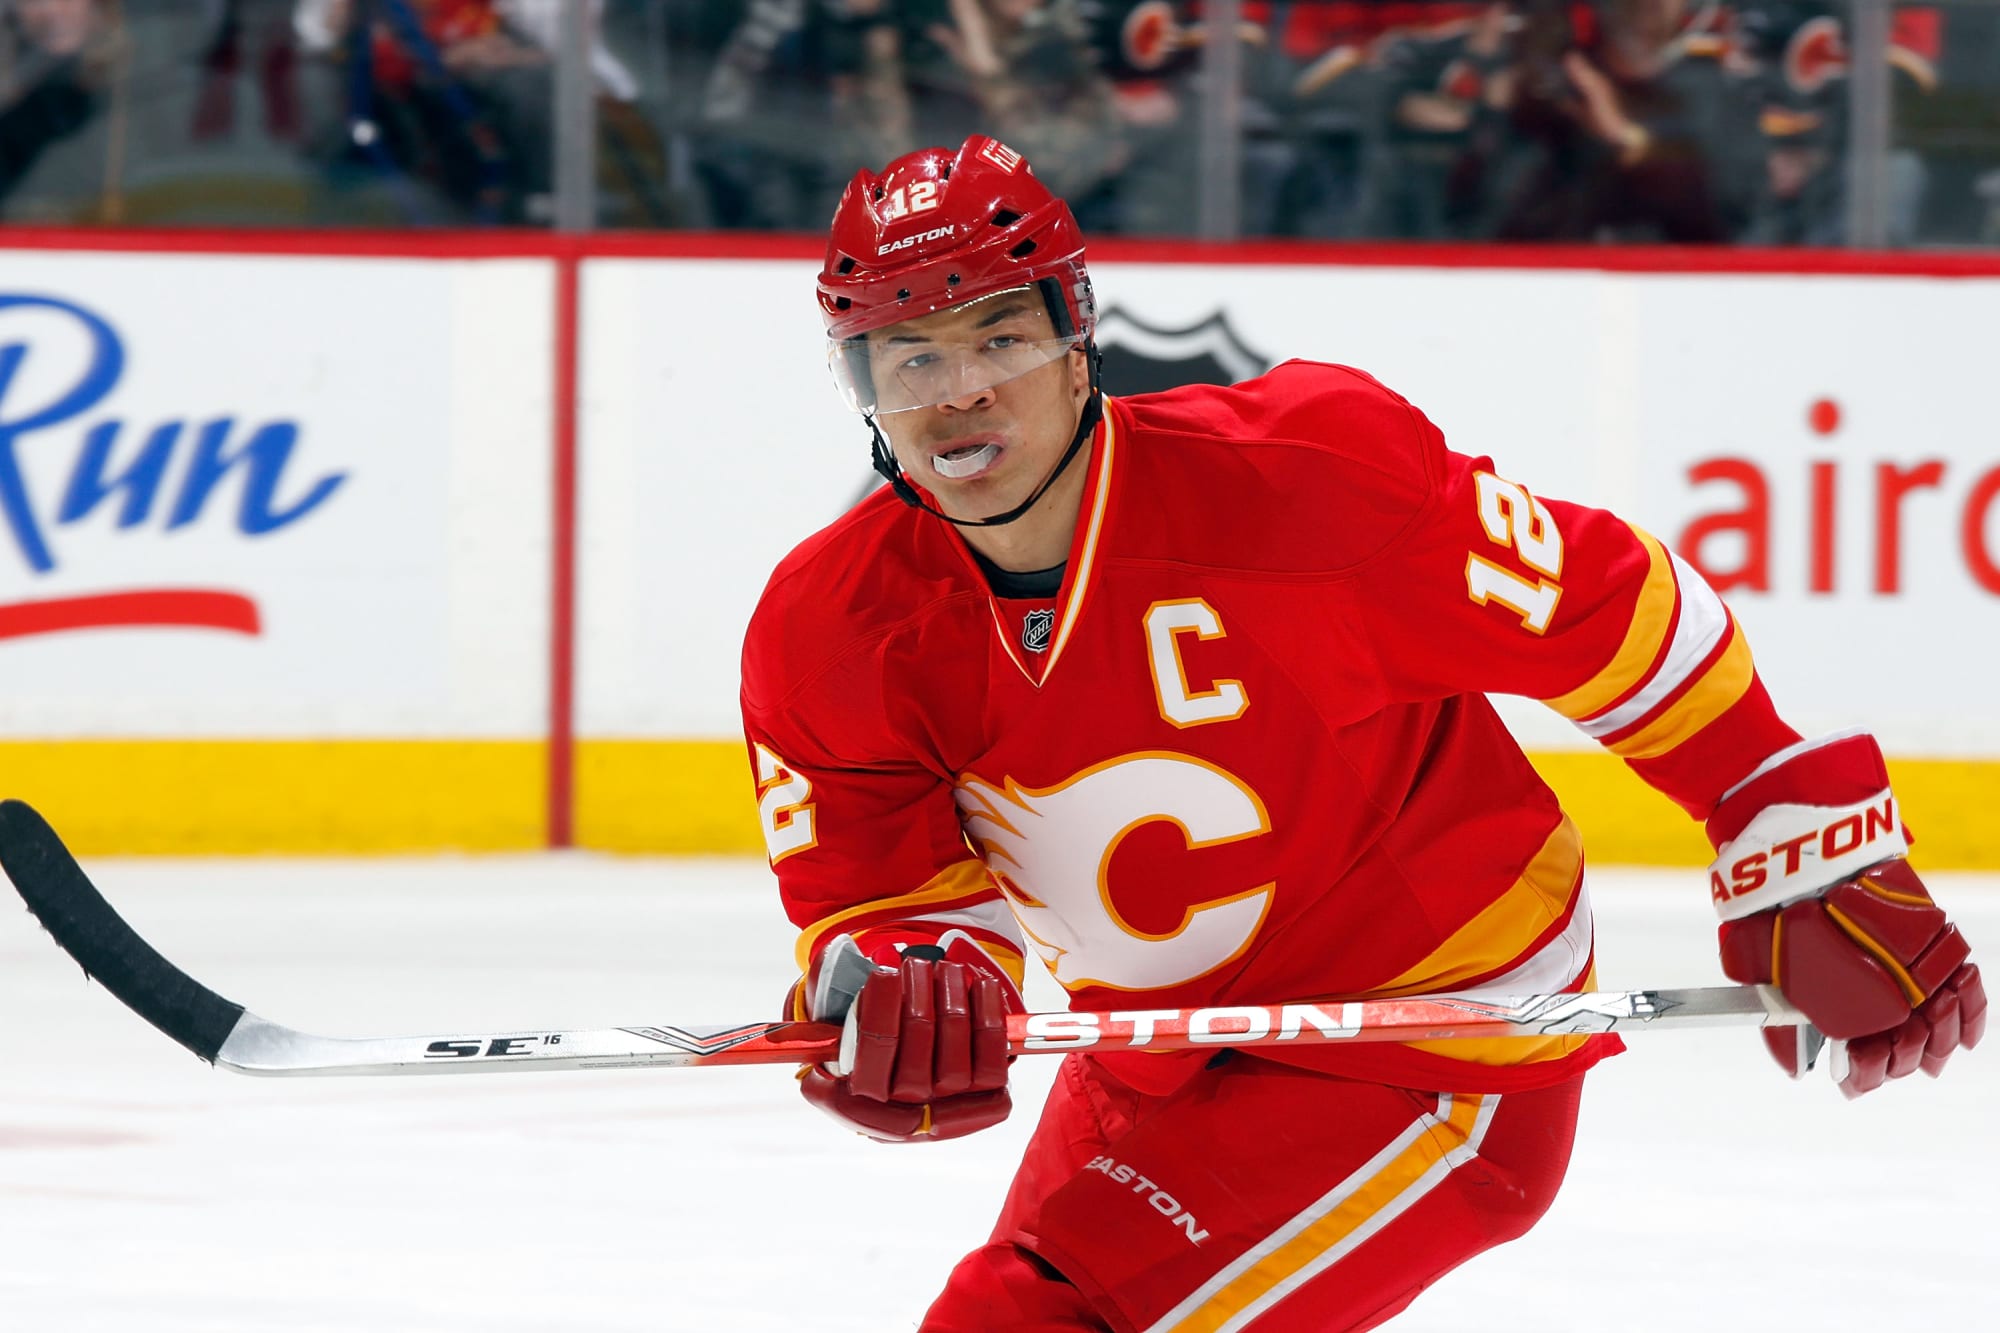 Do the Calgary Flames have the best jerseys in the league? - FlamesNation